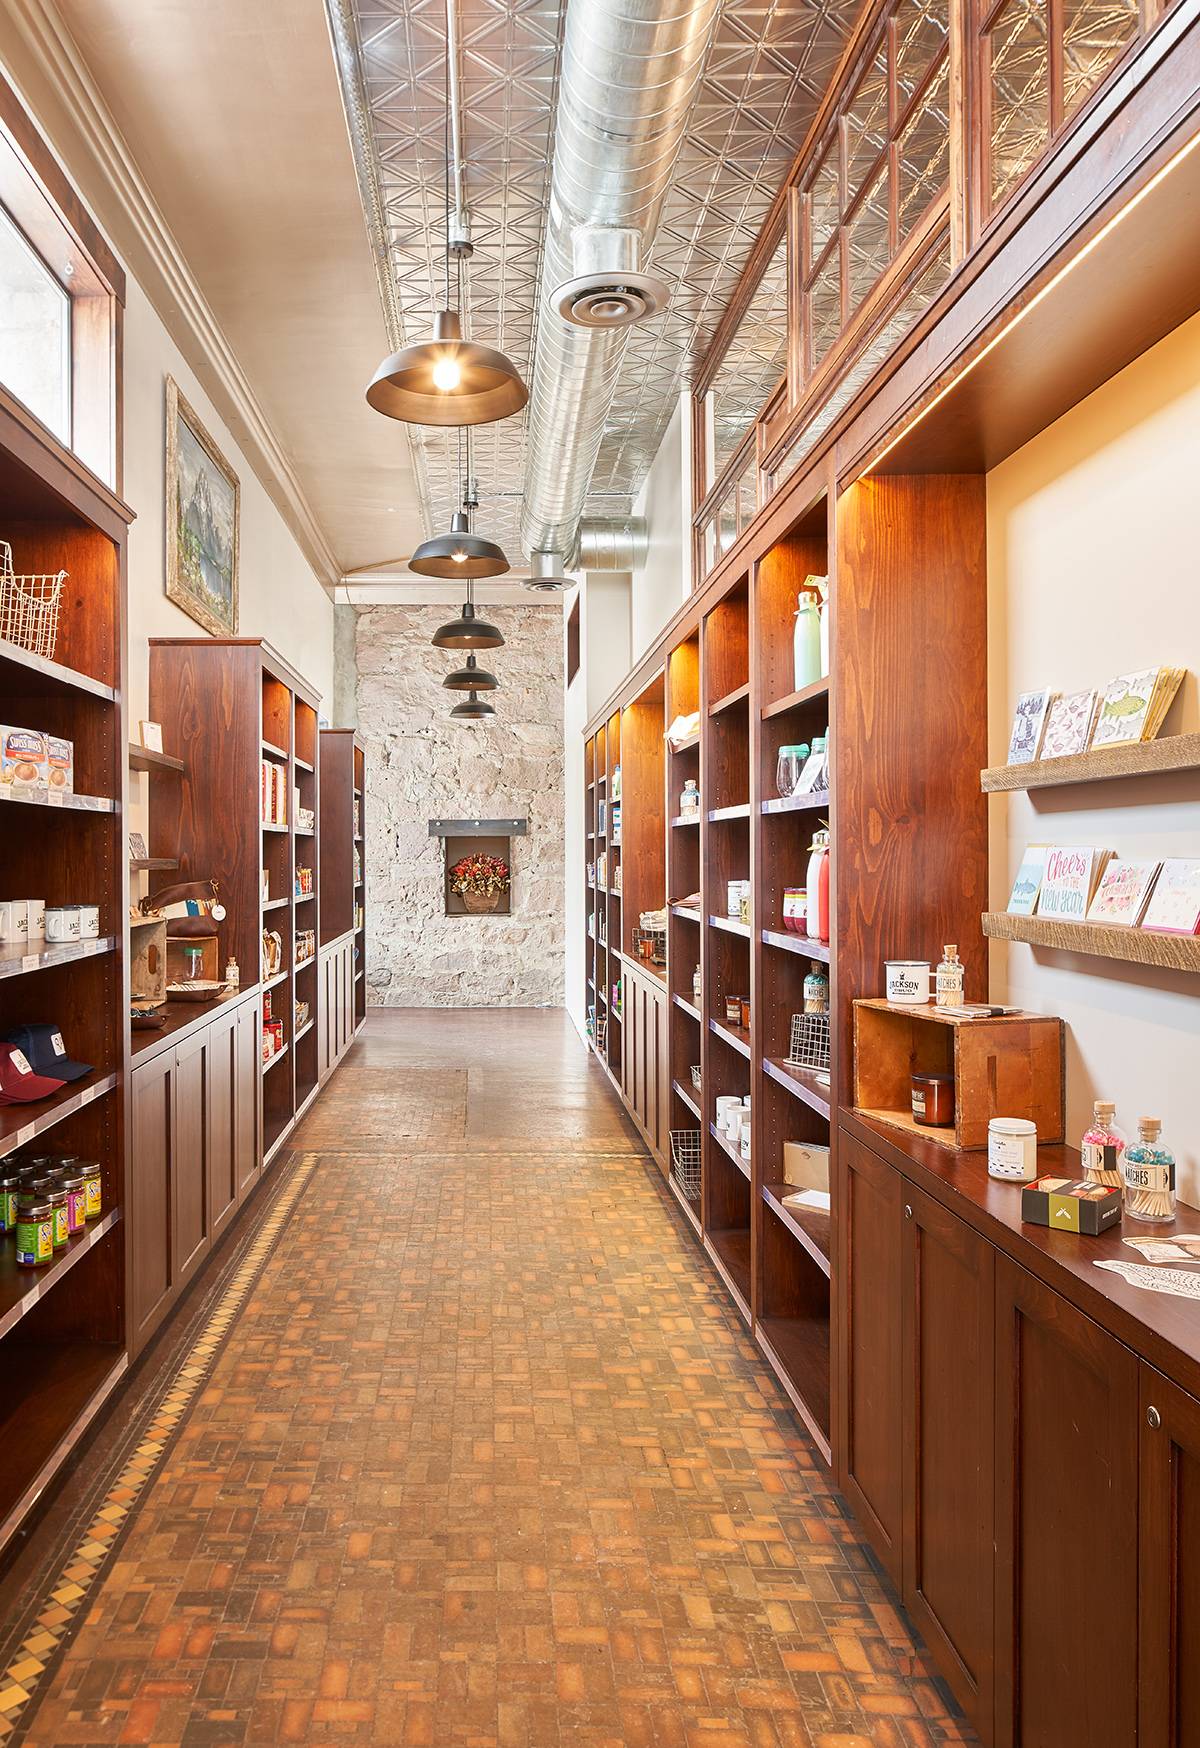 Interior view of the mercantile at Jackson Drug, a custom renovation project designed by Farmer Payne Architects.